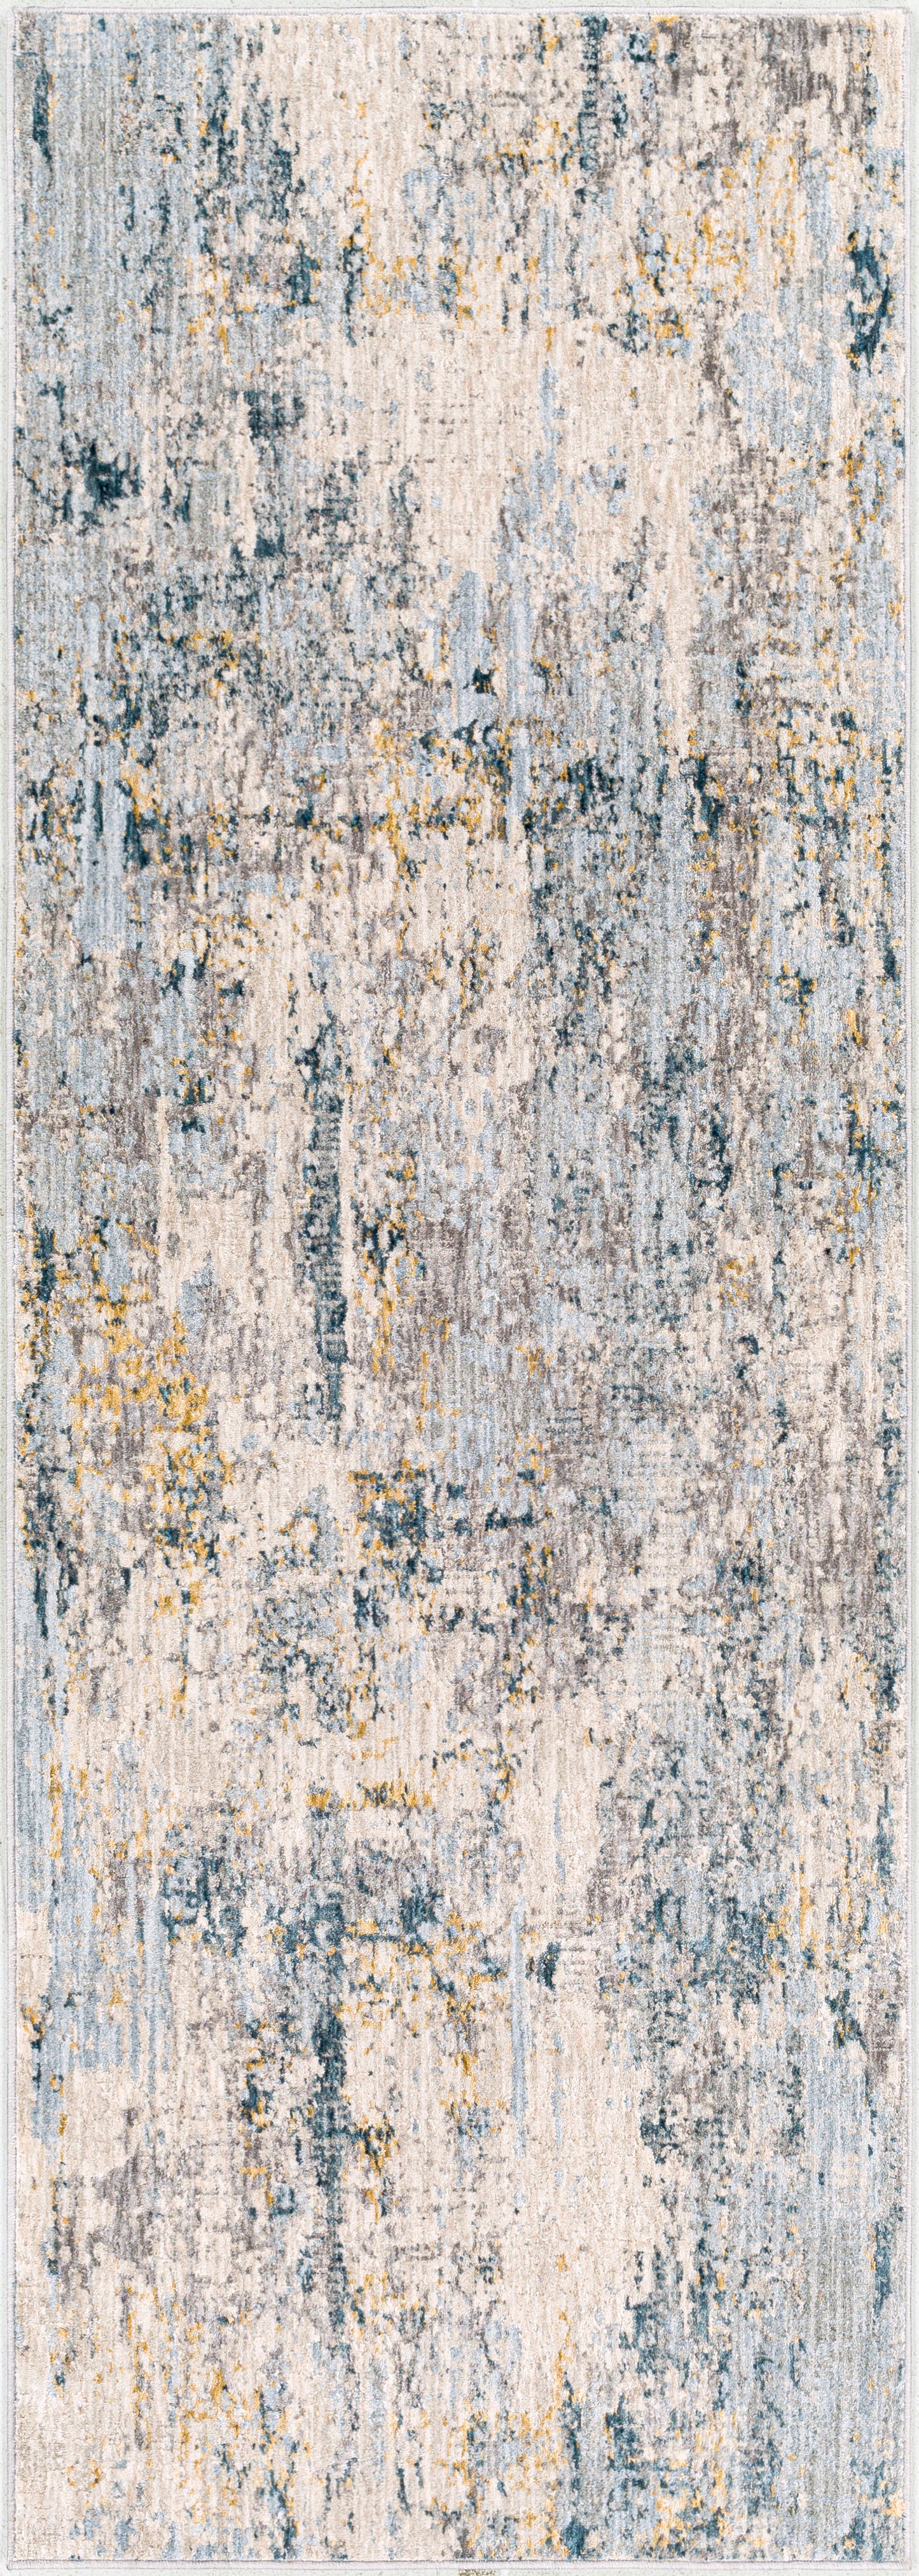 Laila 26562 Machine Woven Synthetic Blend Indoor Area Rug by Surya Rugs